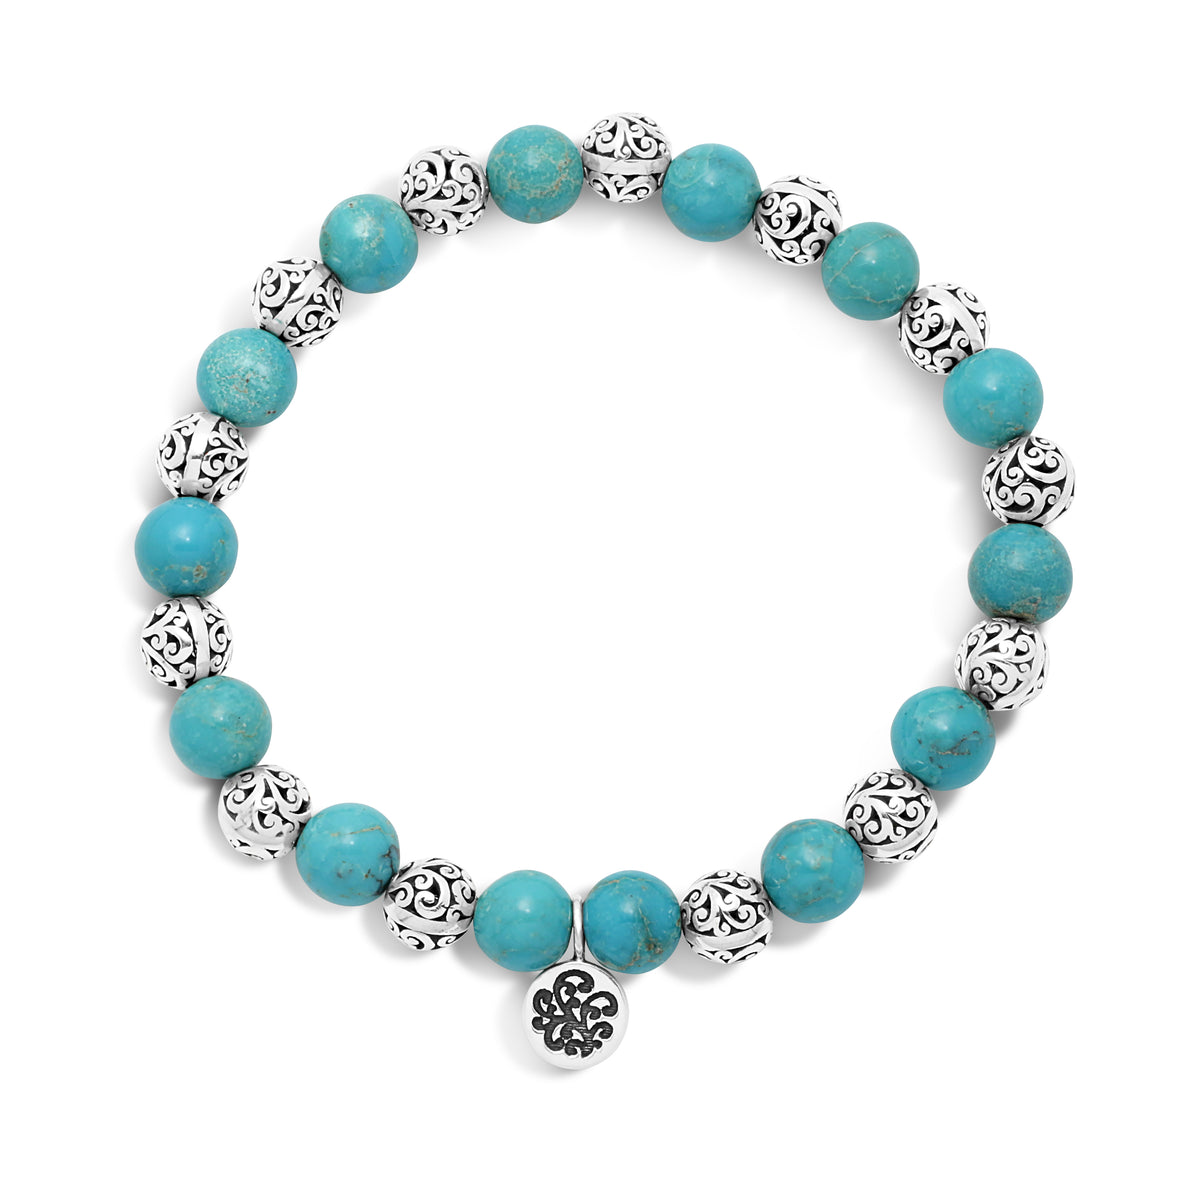 Bright Blue Turquoise Bead (7mm) with Scroll Sterling Silver Bead Stretch Bracelet - Lois Hill Jewelry